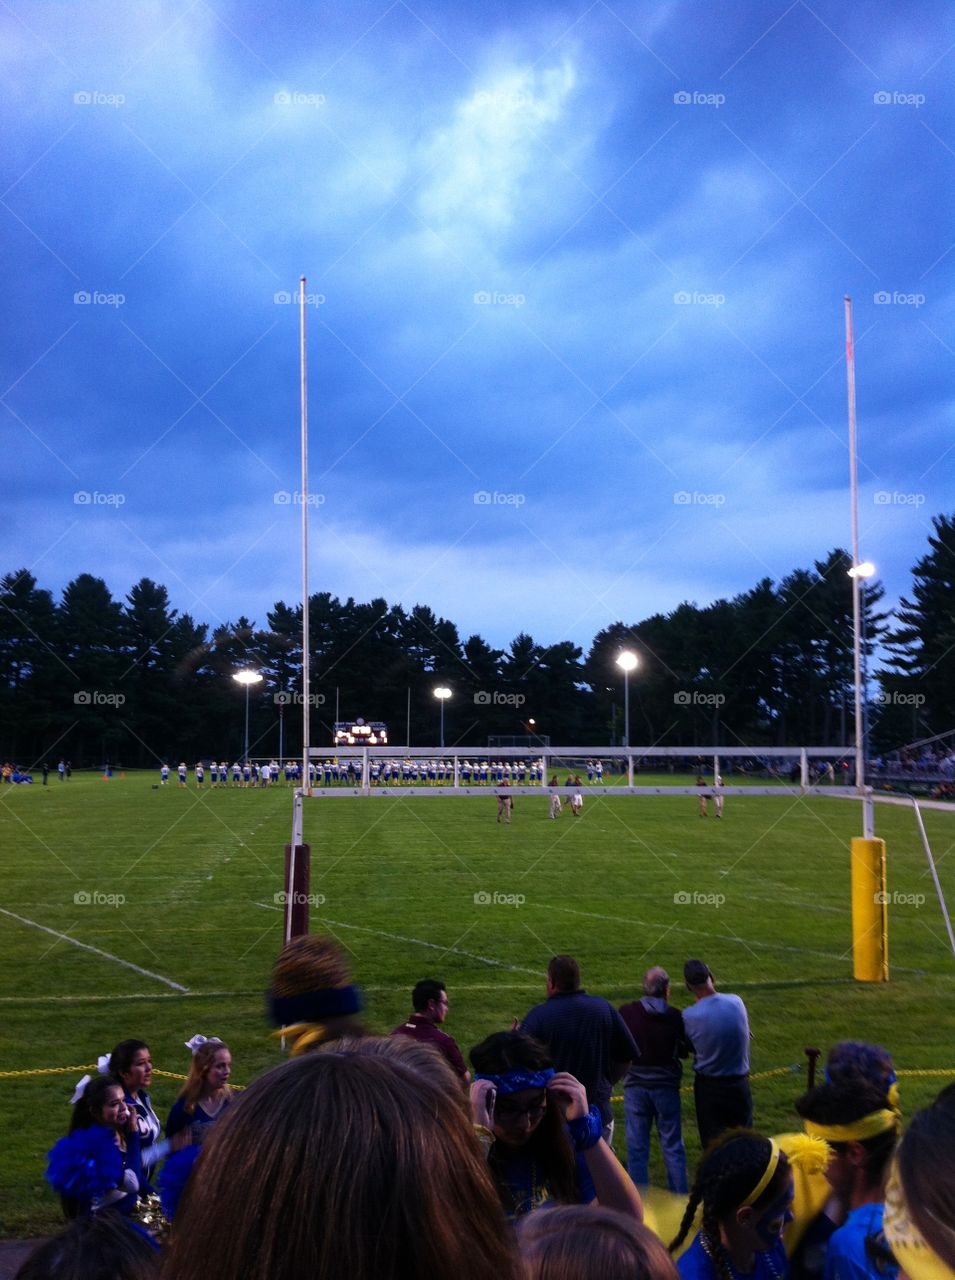 Chicopee,MA Sword Game Comp Colts Vs. High Pacers Football Game